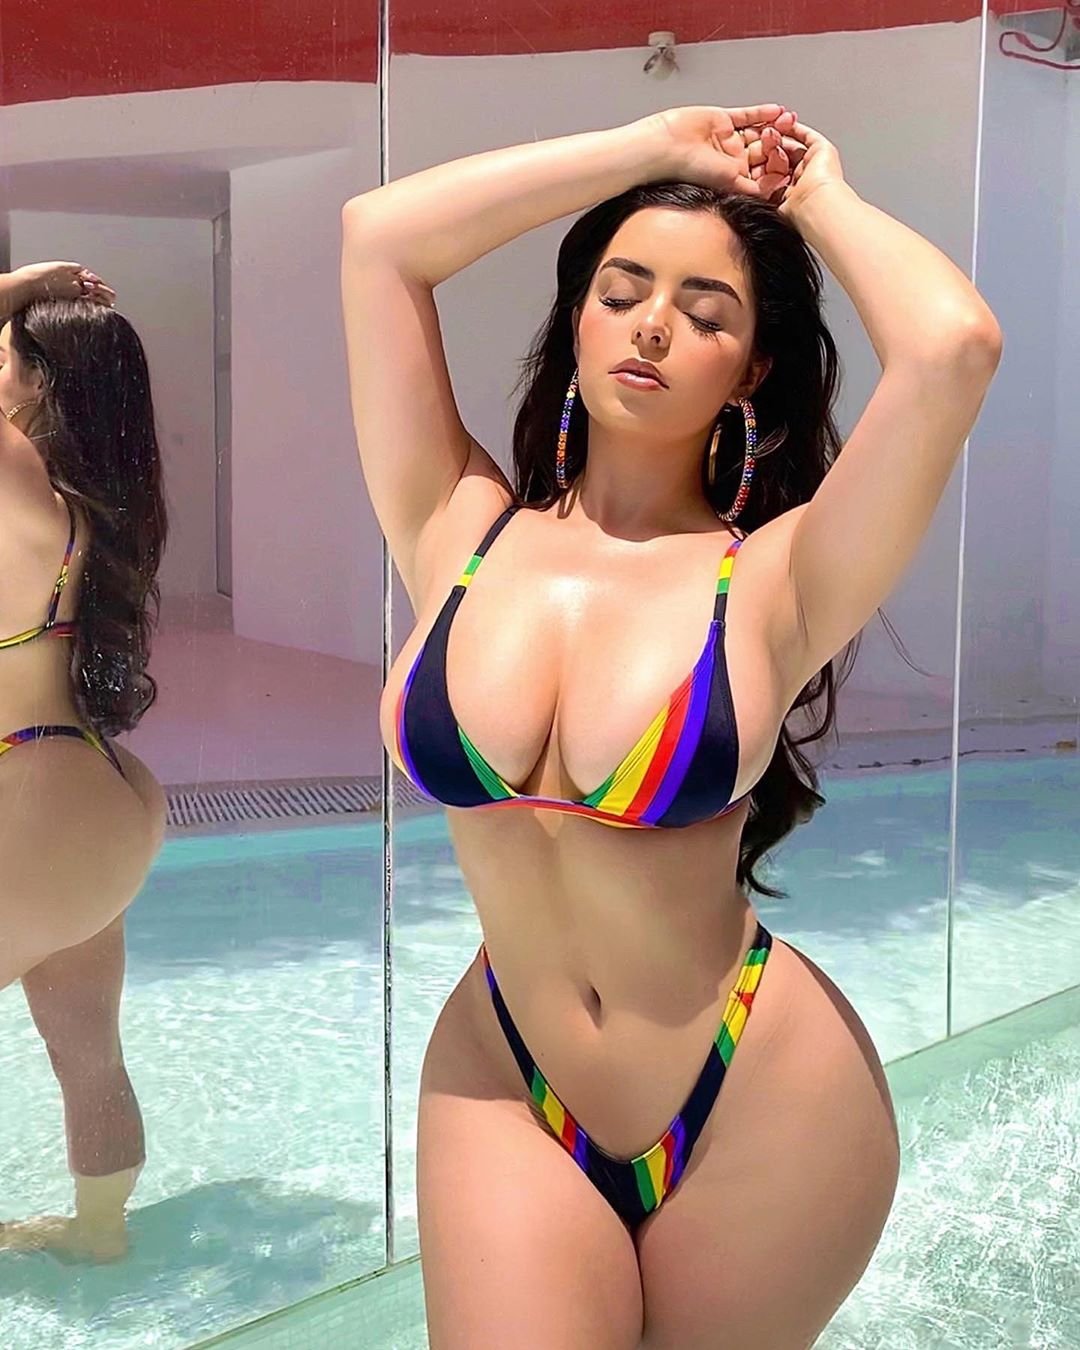 Daily mail demi rose